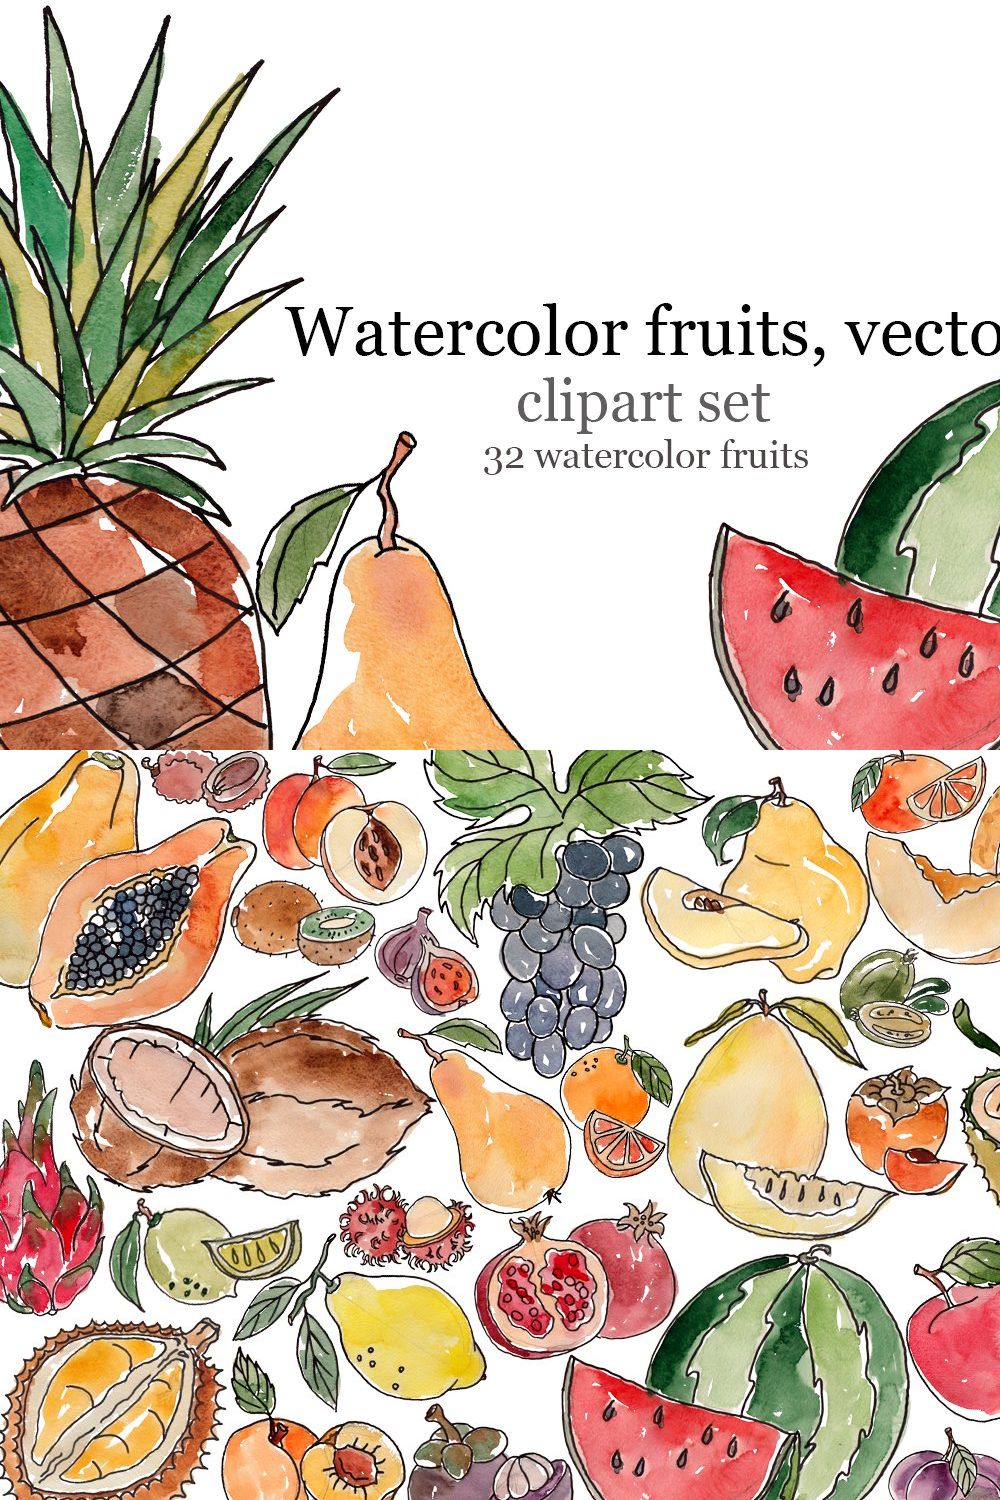 Watercolor fruits, vector pinterest preview image.